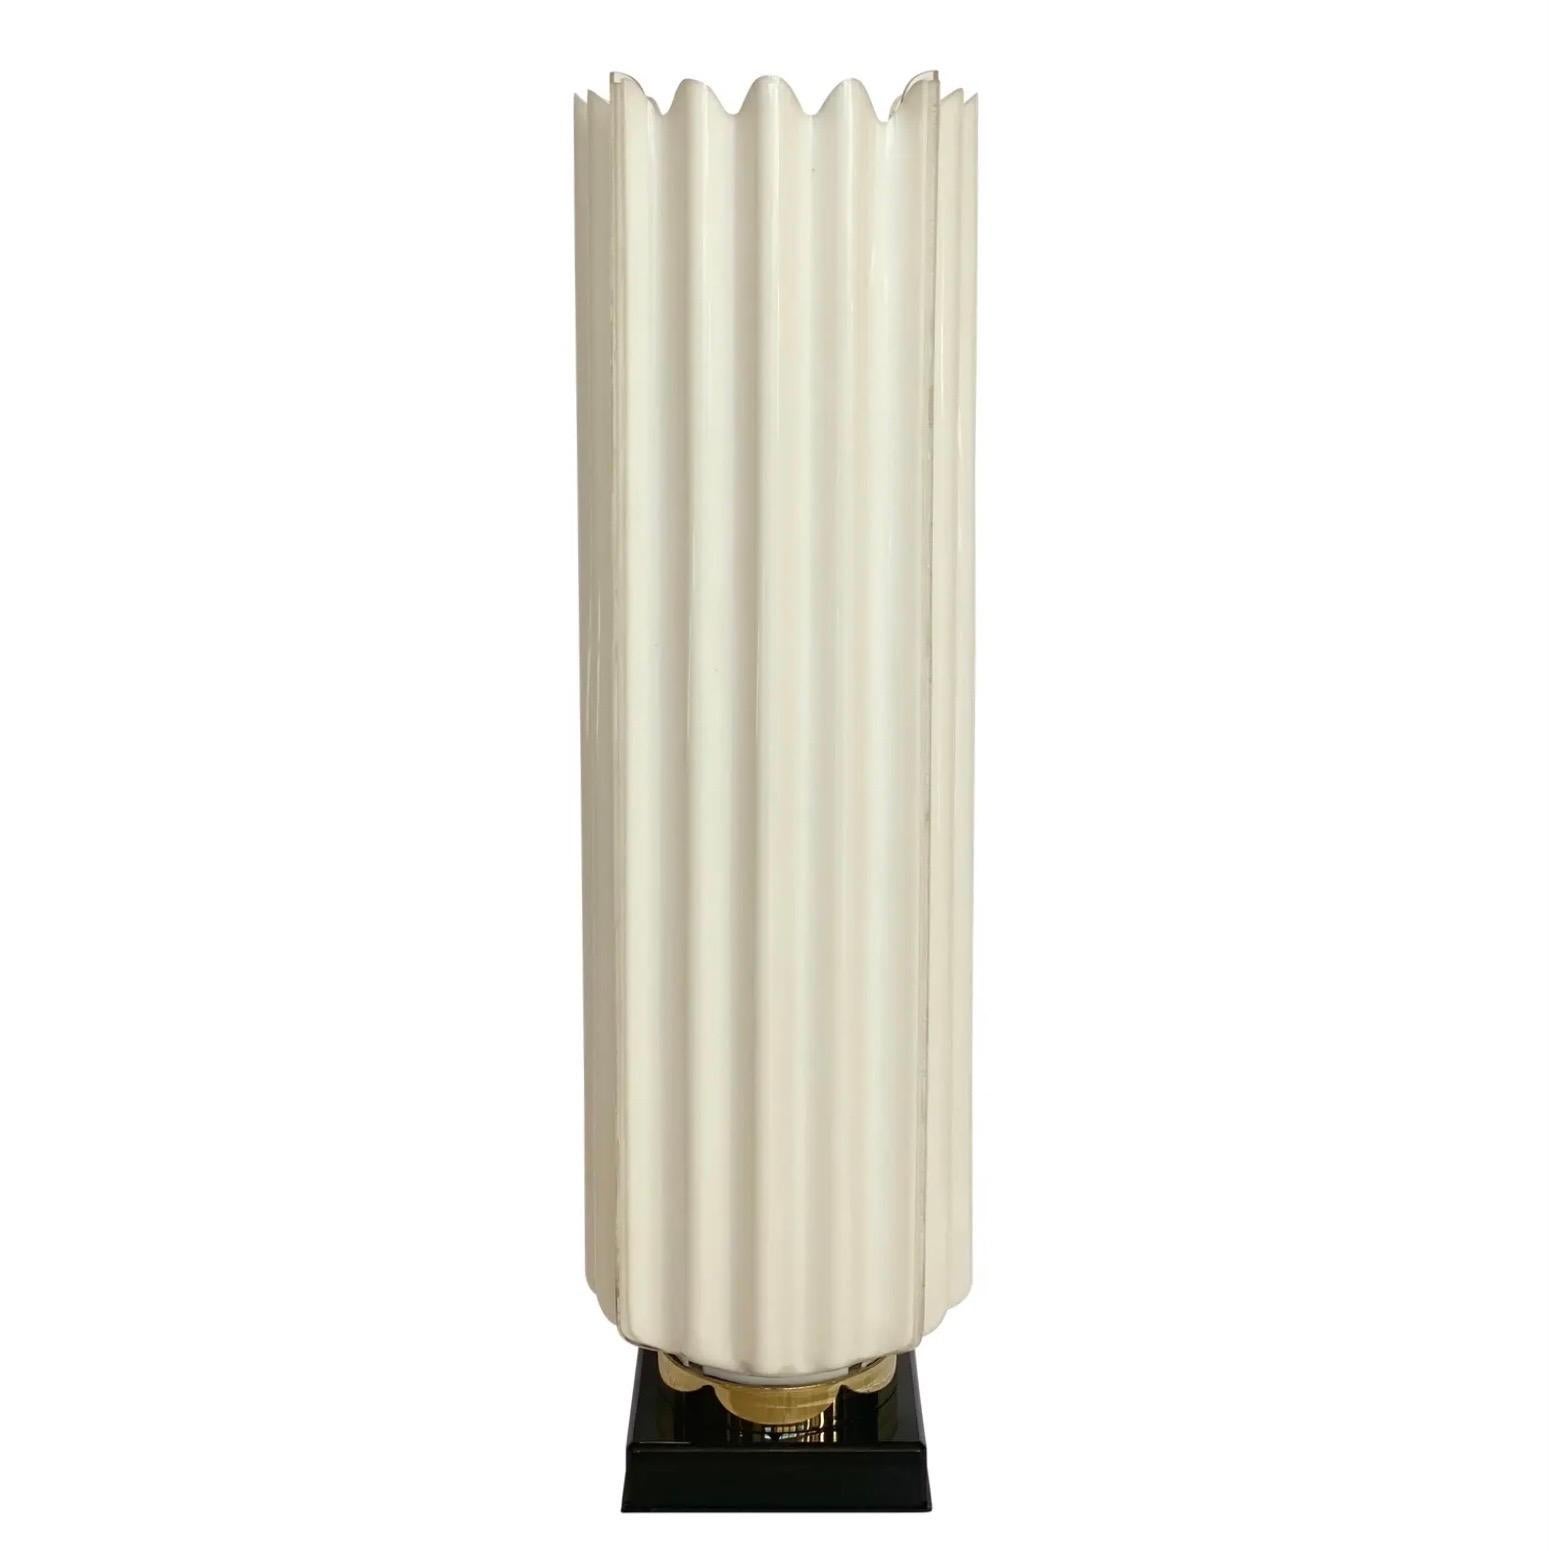 1970s Rougier White Fluted Acrylic Table Lamp